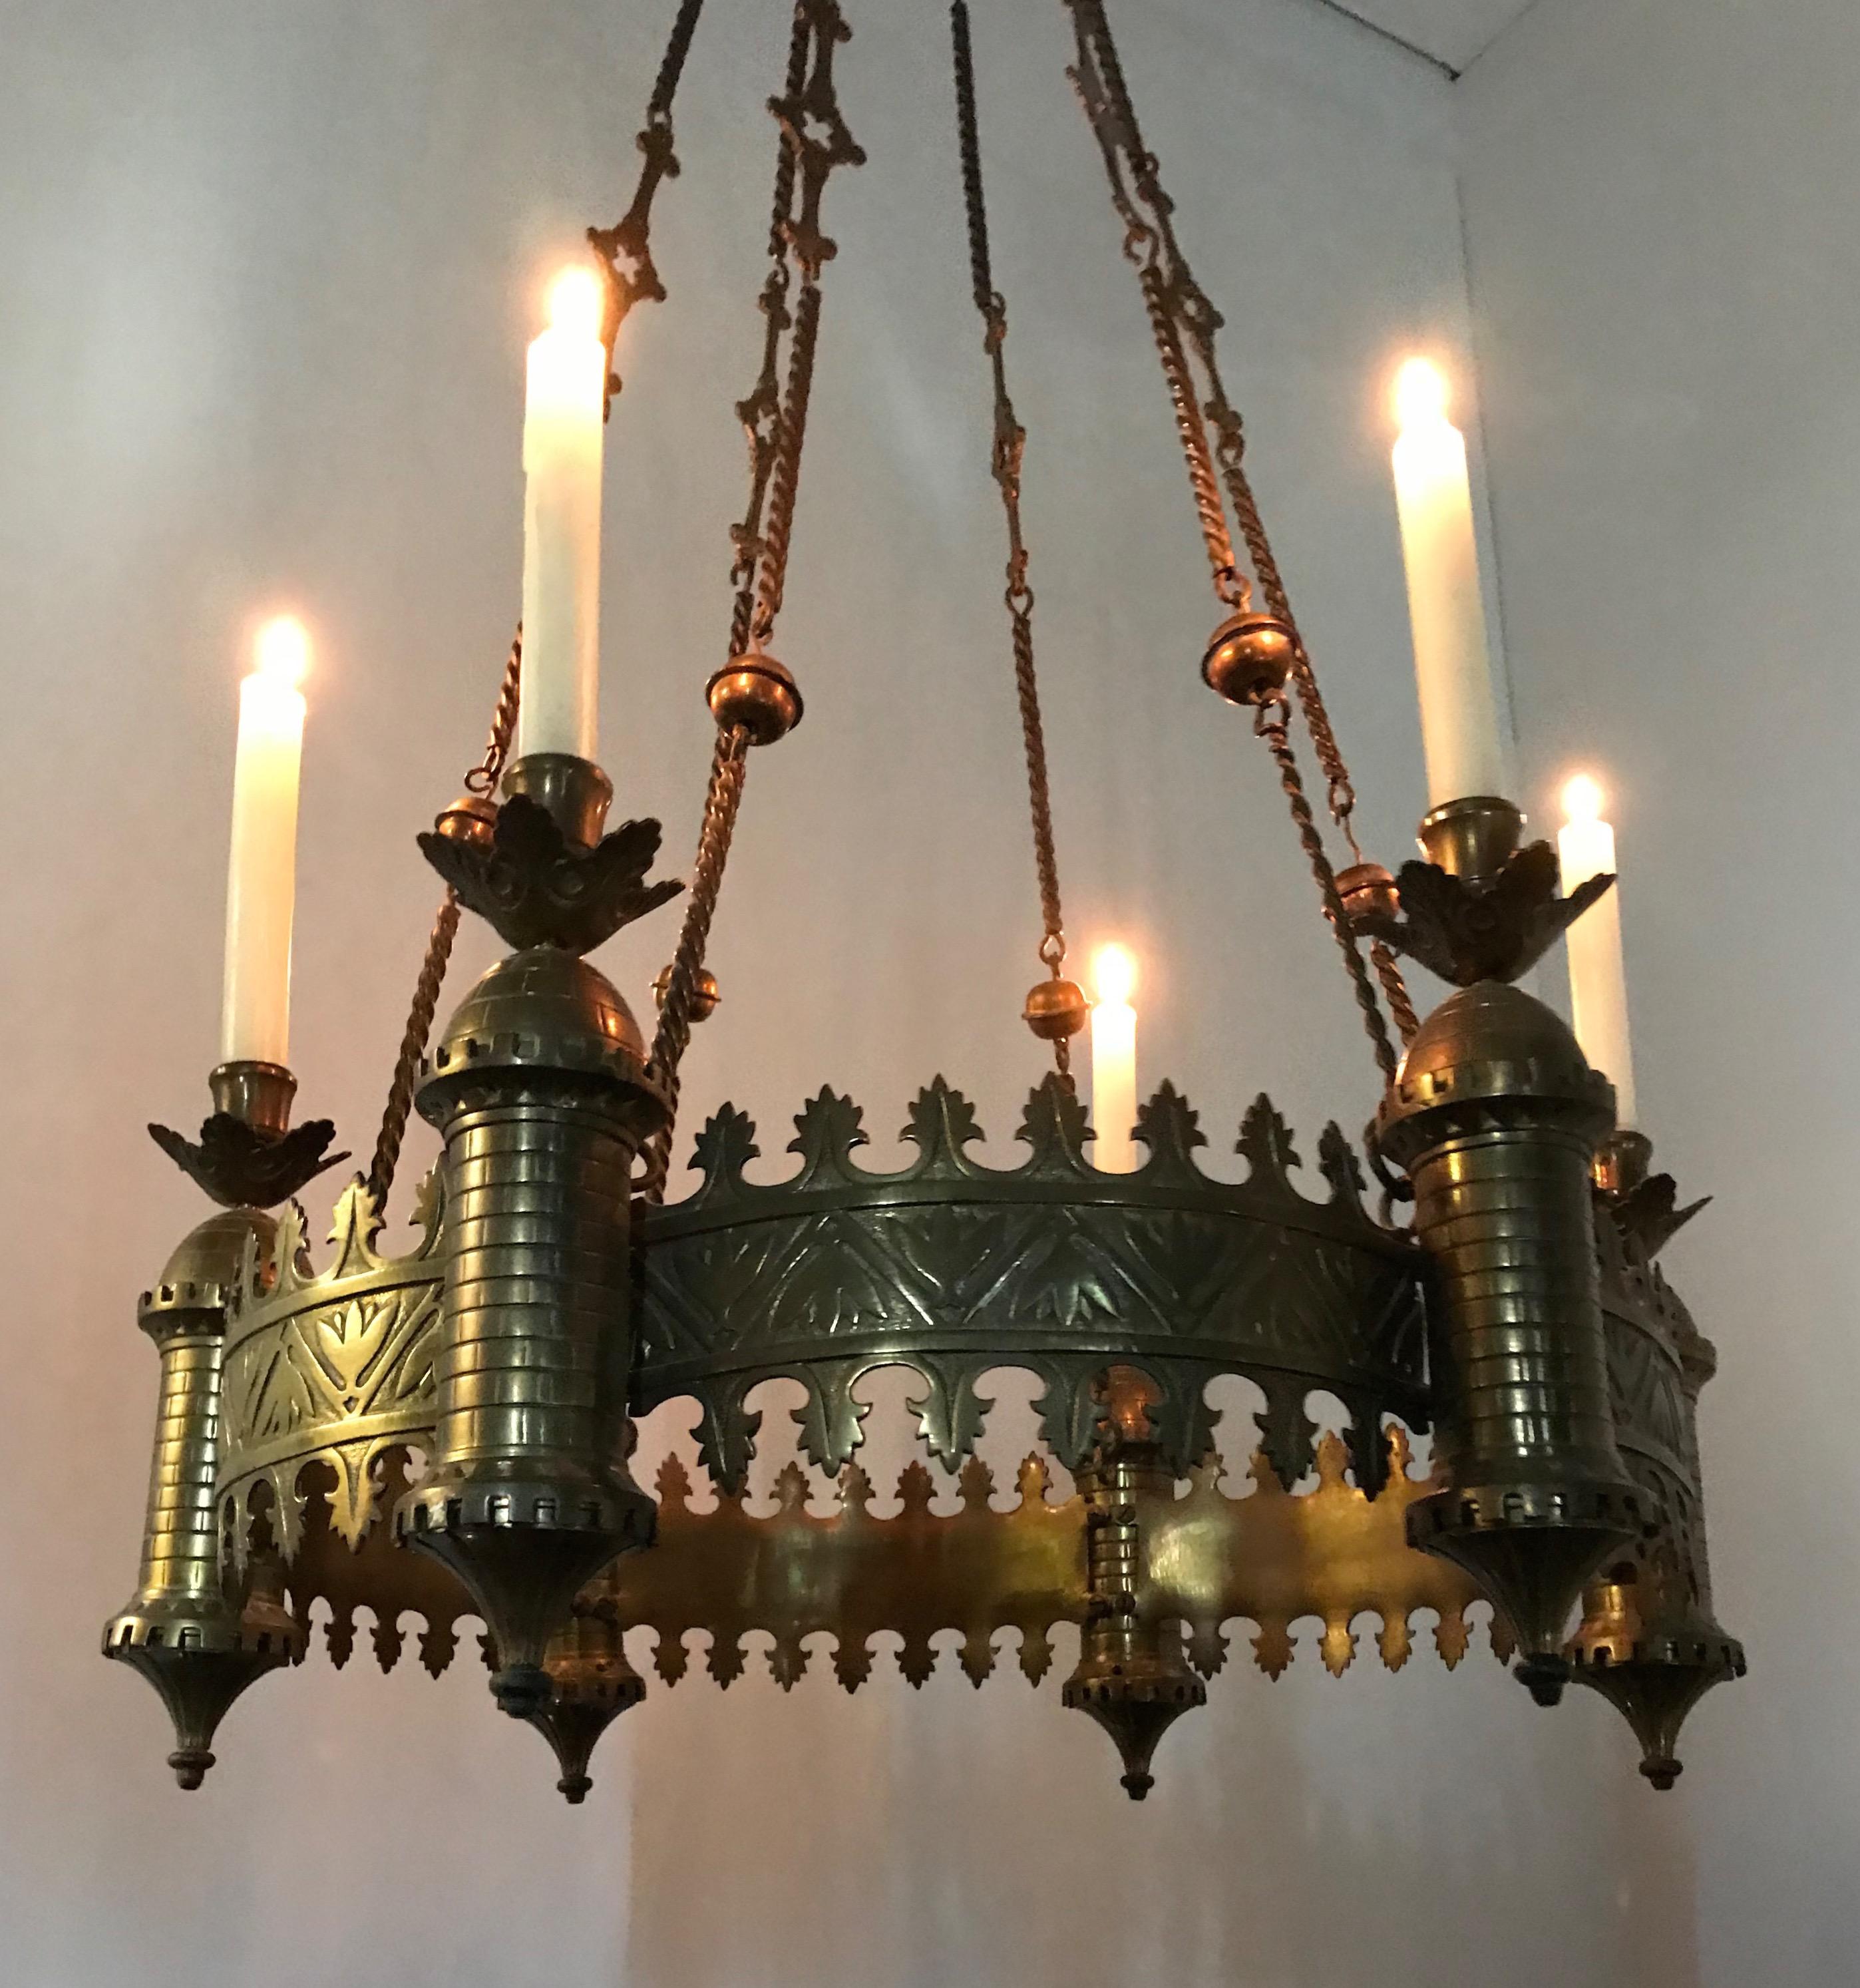 Antique Bronze and Brass Castle Tower Design Gothic Revival Candle Chandelier 11